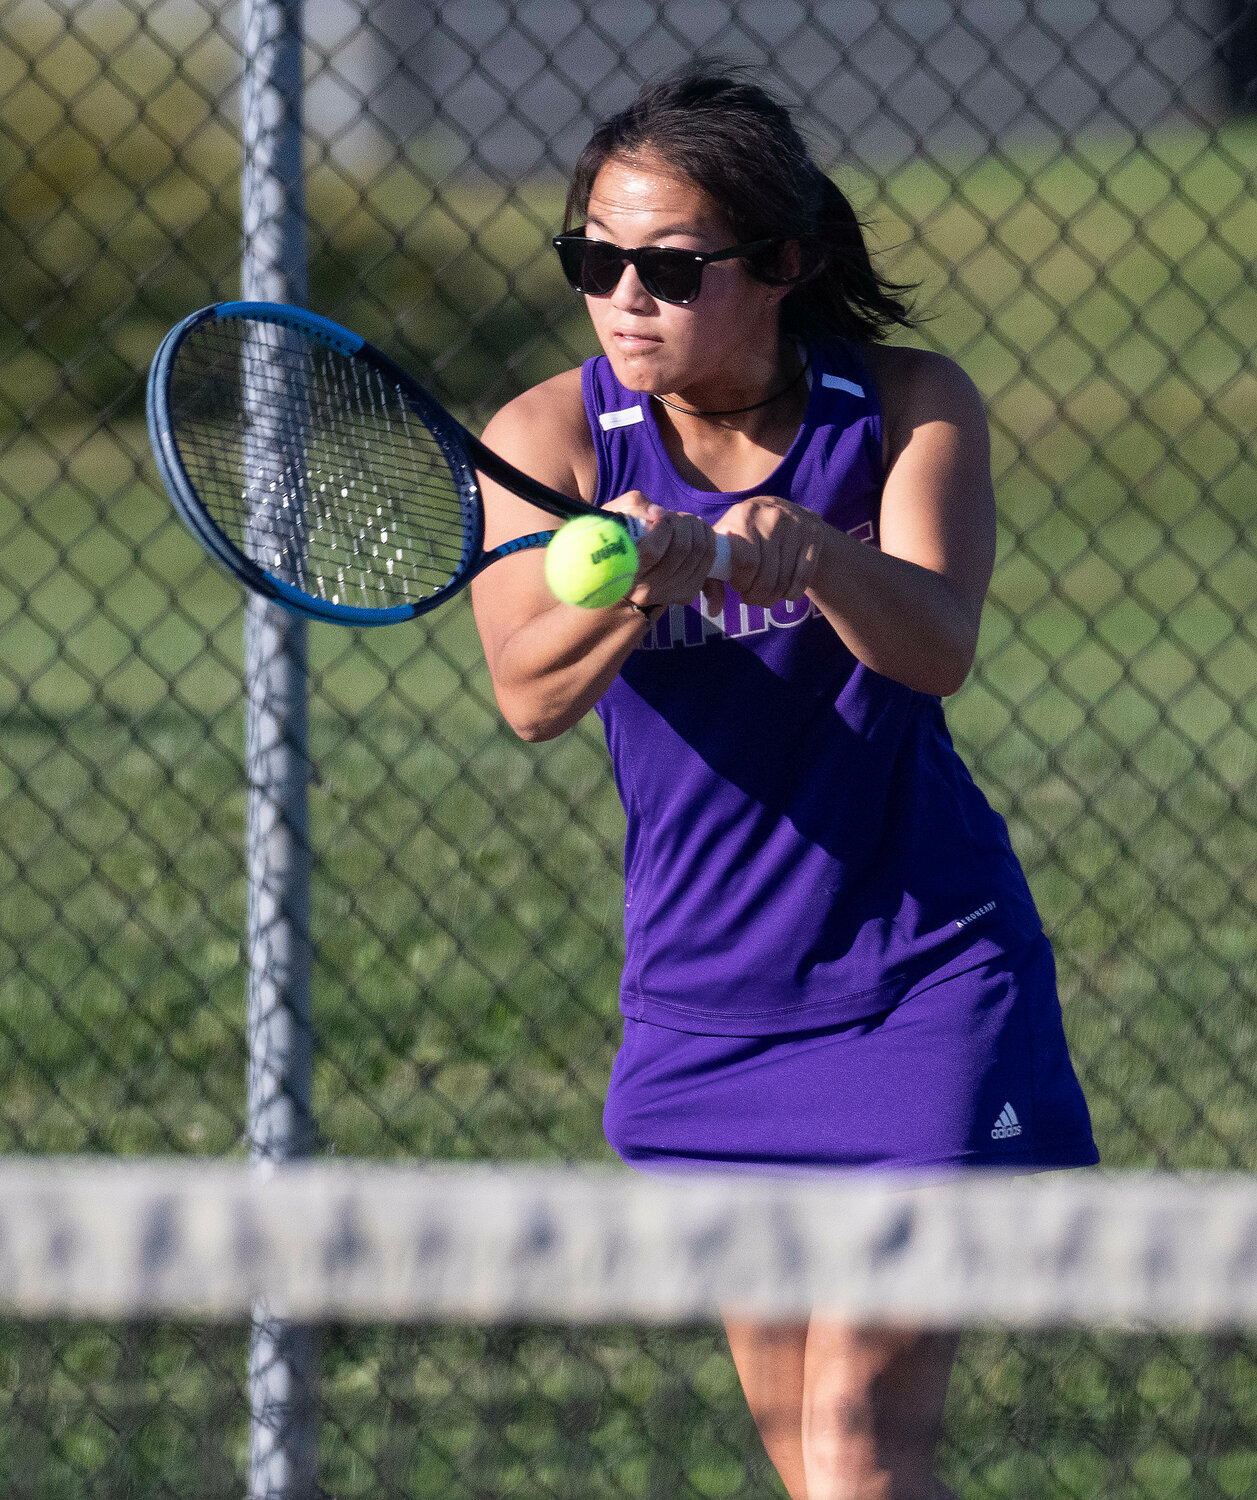 Huskies first singles player Elsa White hits a backhand during her 6-3, 6-4, win over Mia Renzulli of Prout. White has been dominant at times in her 4-1 start to the season.